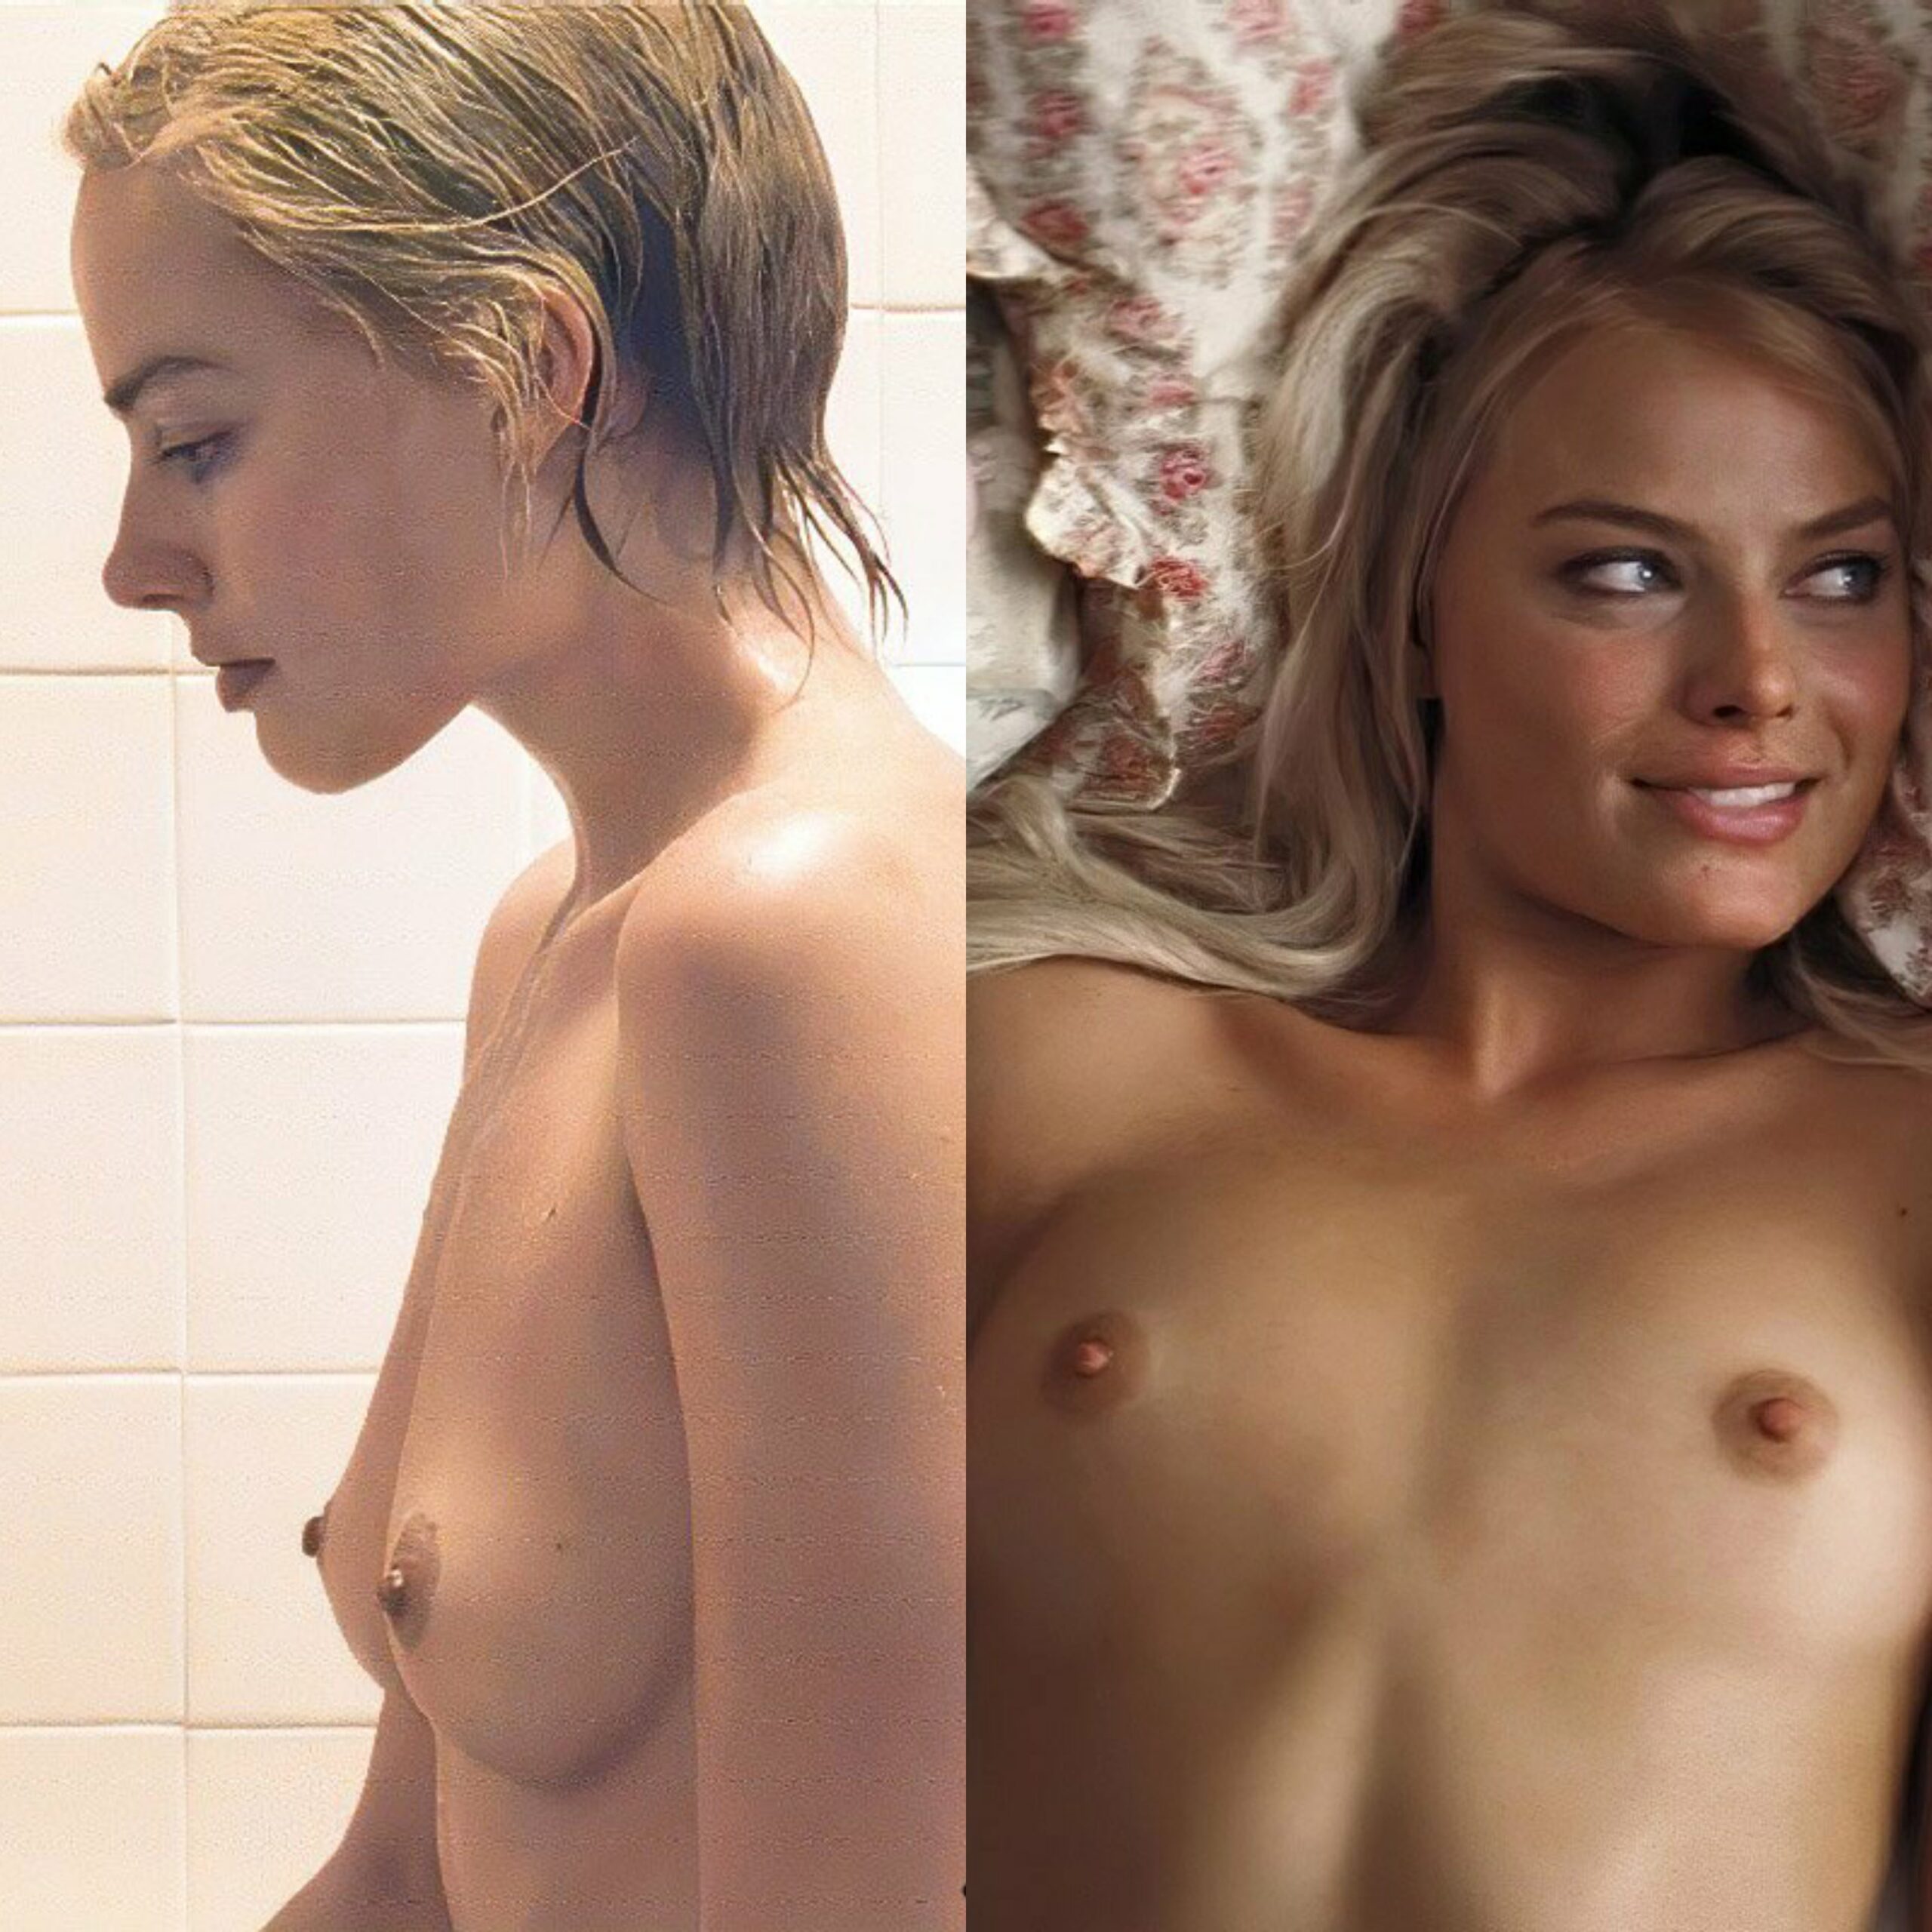 Some nice angles of Margot Robbie